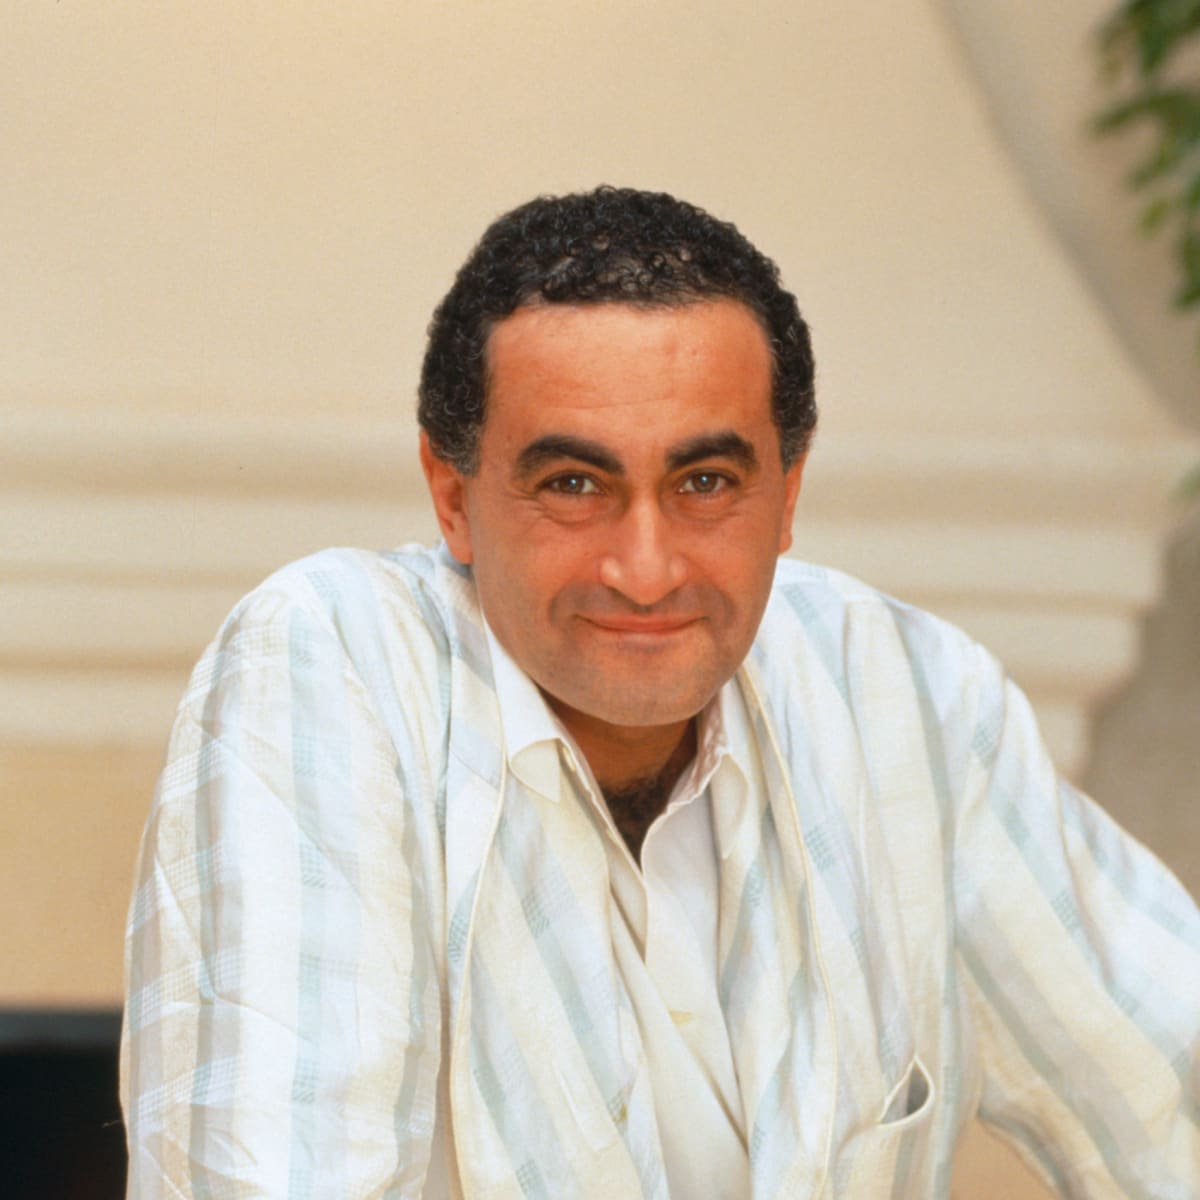 Who Is Mohamed Al-Fayed Son, Dodi Fayed?